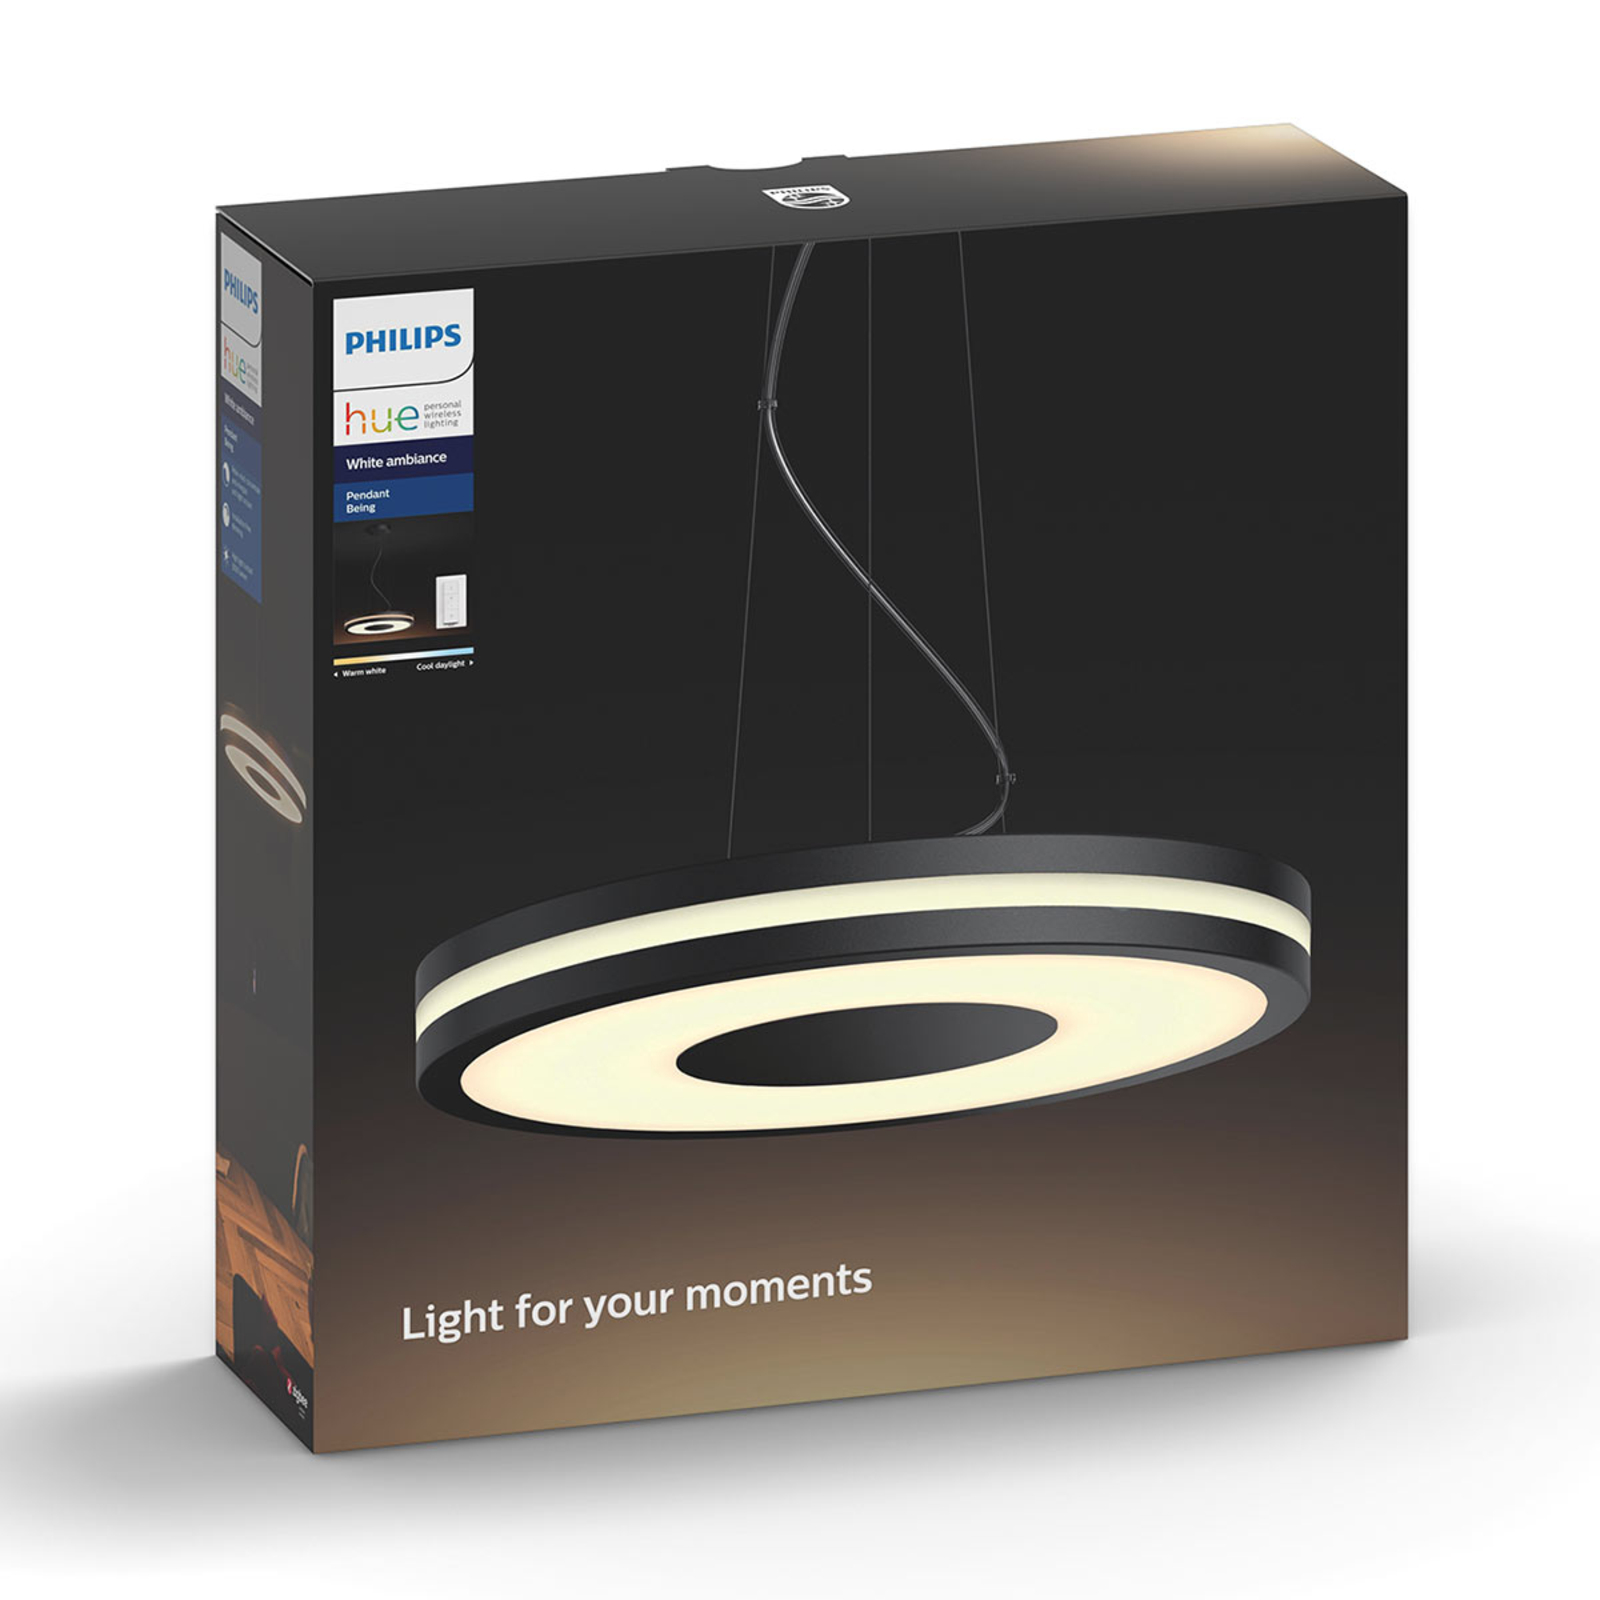 Philips Hue Being lampada a sospensione LED nera